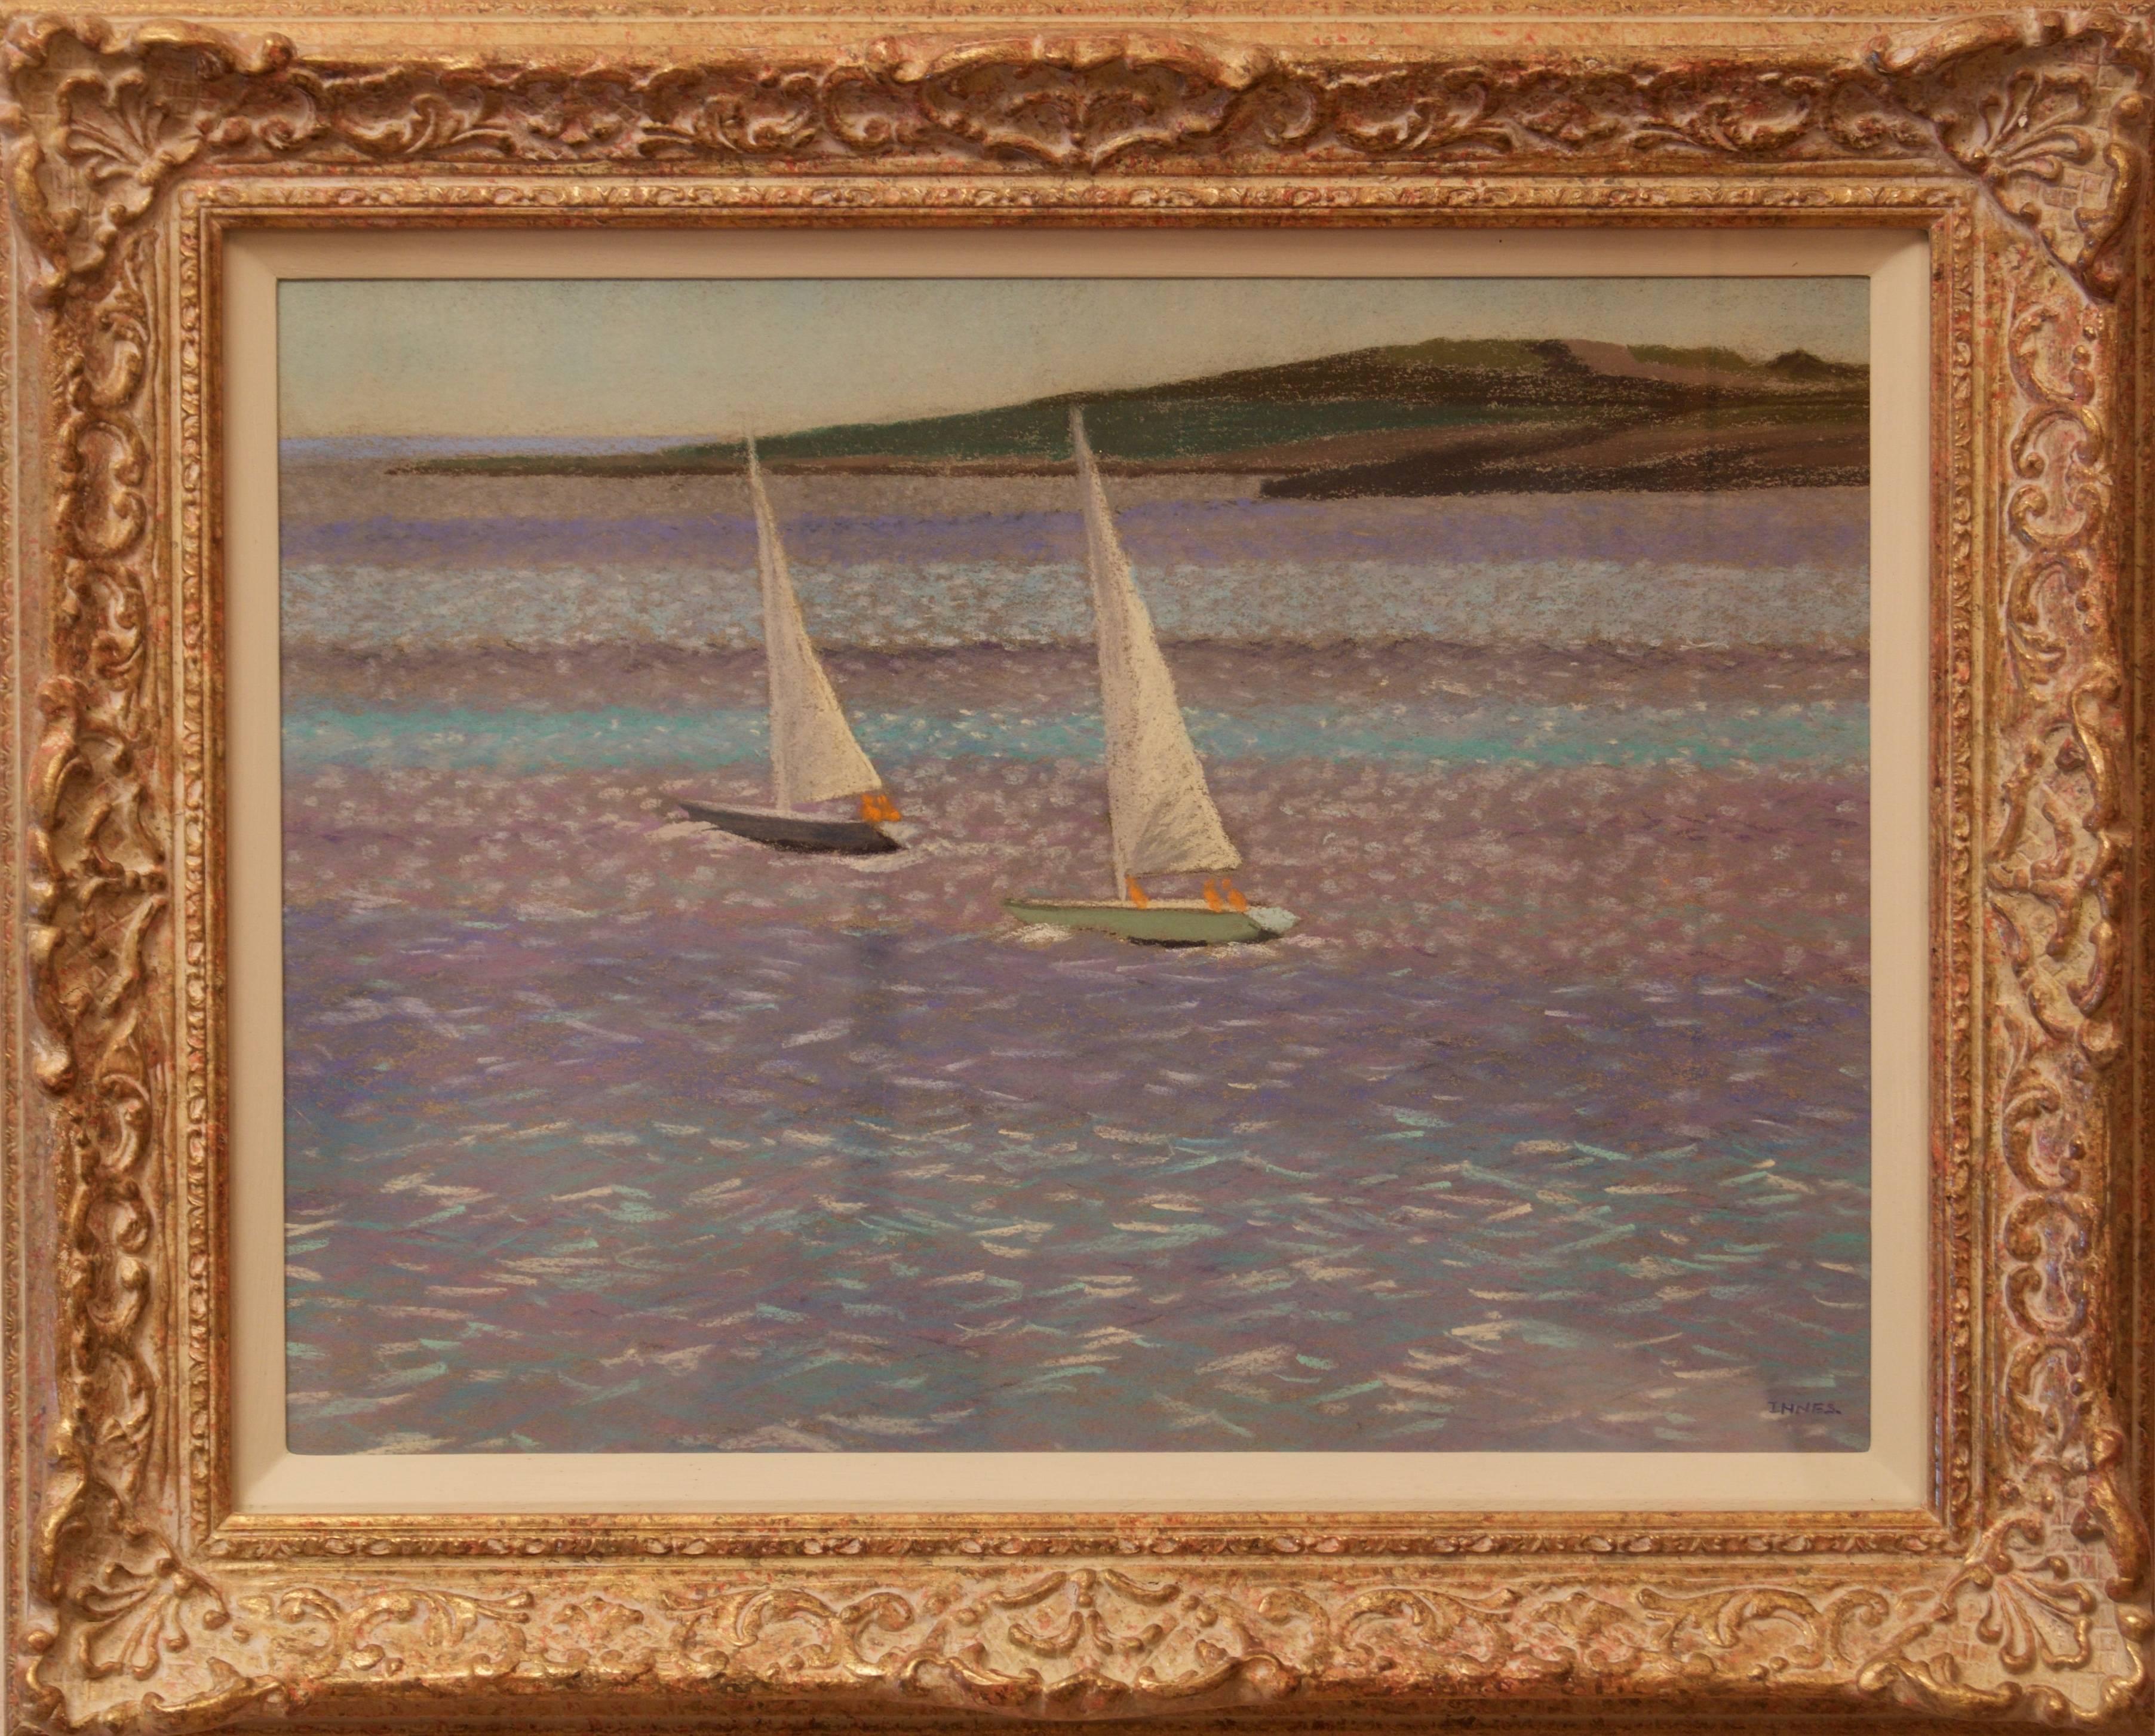 Sail Boats by the Shore - Mid 20th Century Pastel Landscape by William Innes - Painting by William Henry Innes